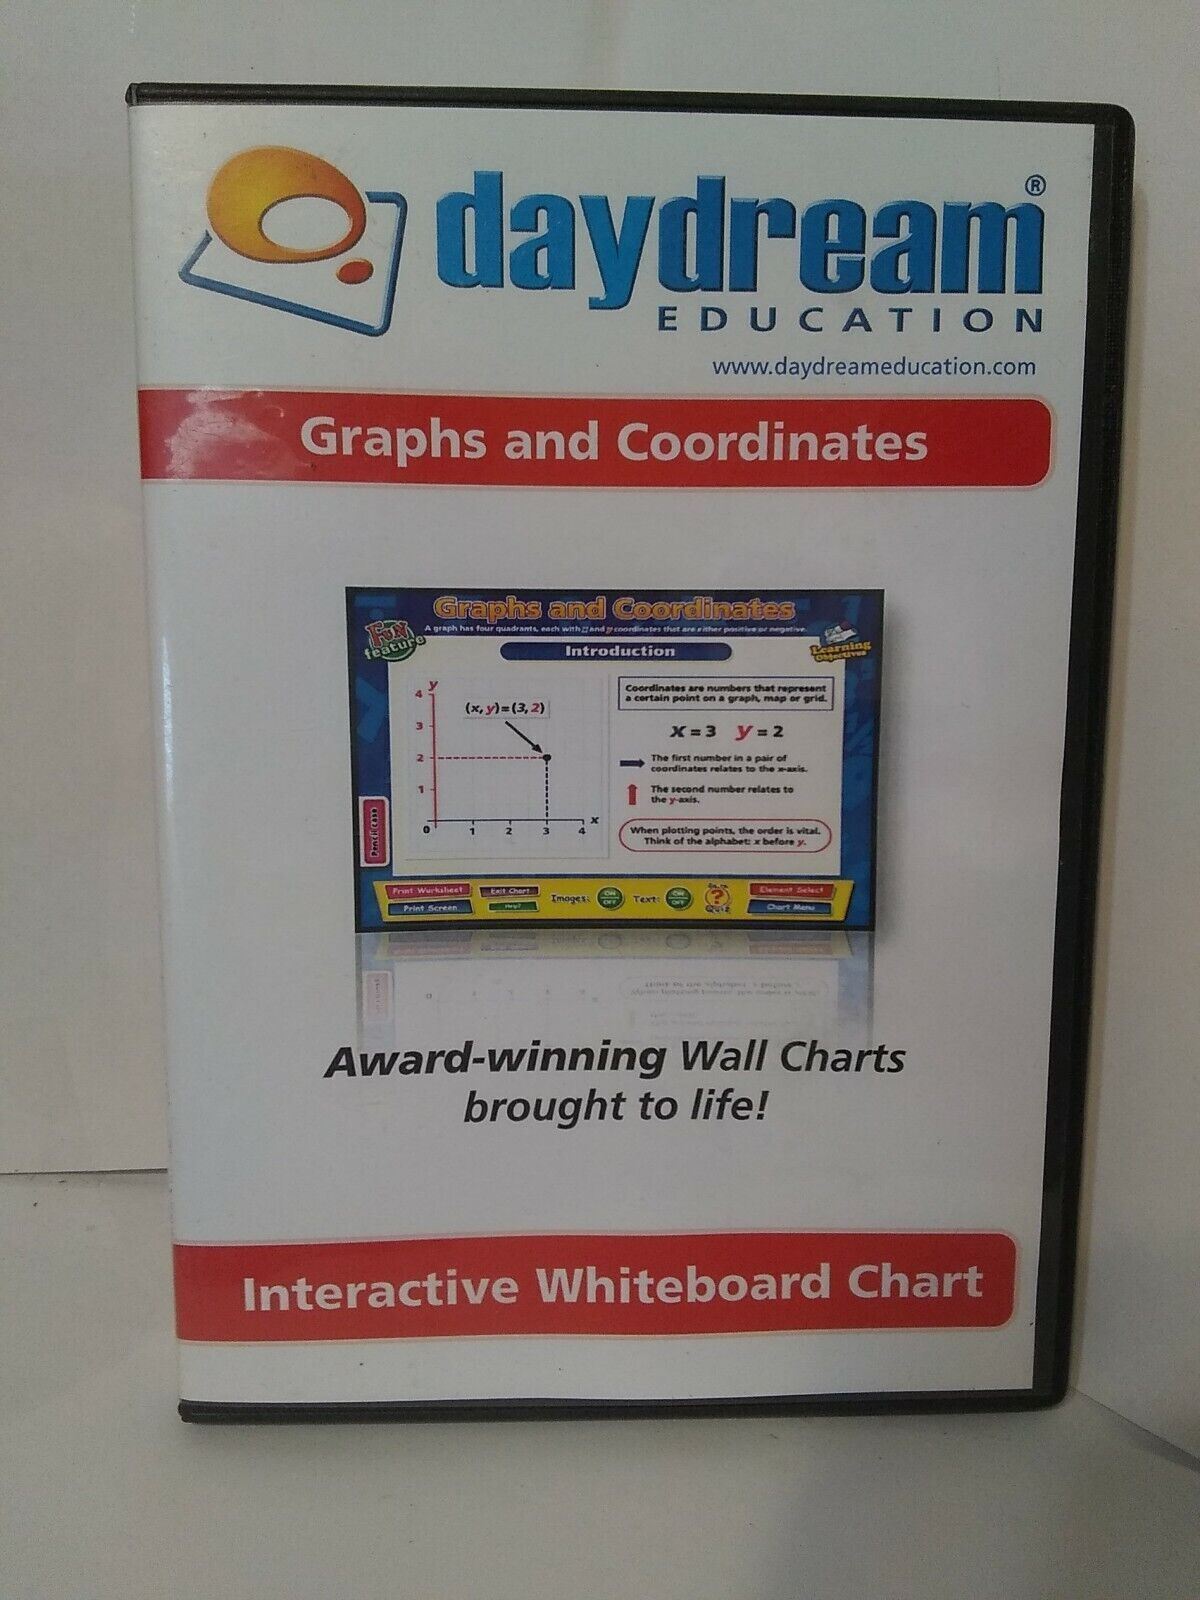 Daydream Education Interactive Whiteboard Chart Software Graphs and Coordinates